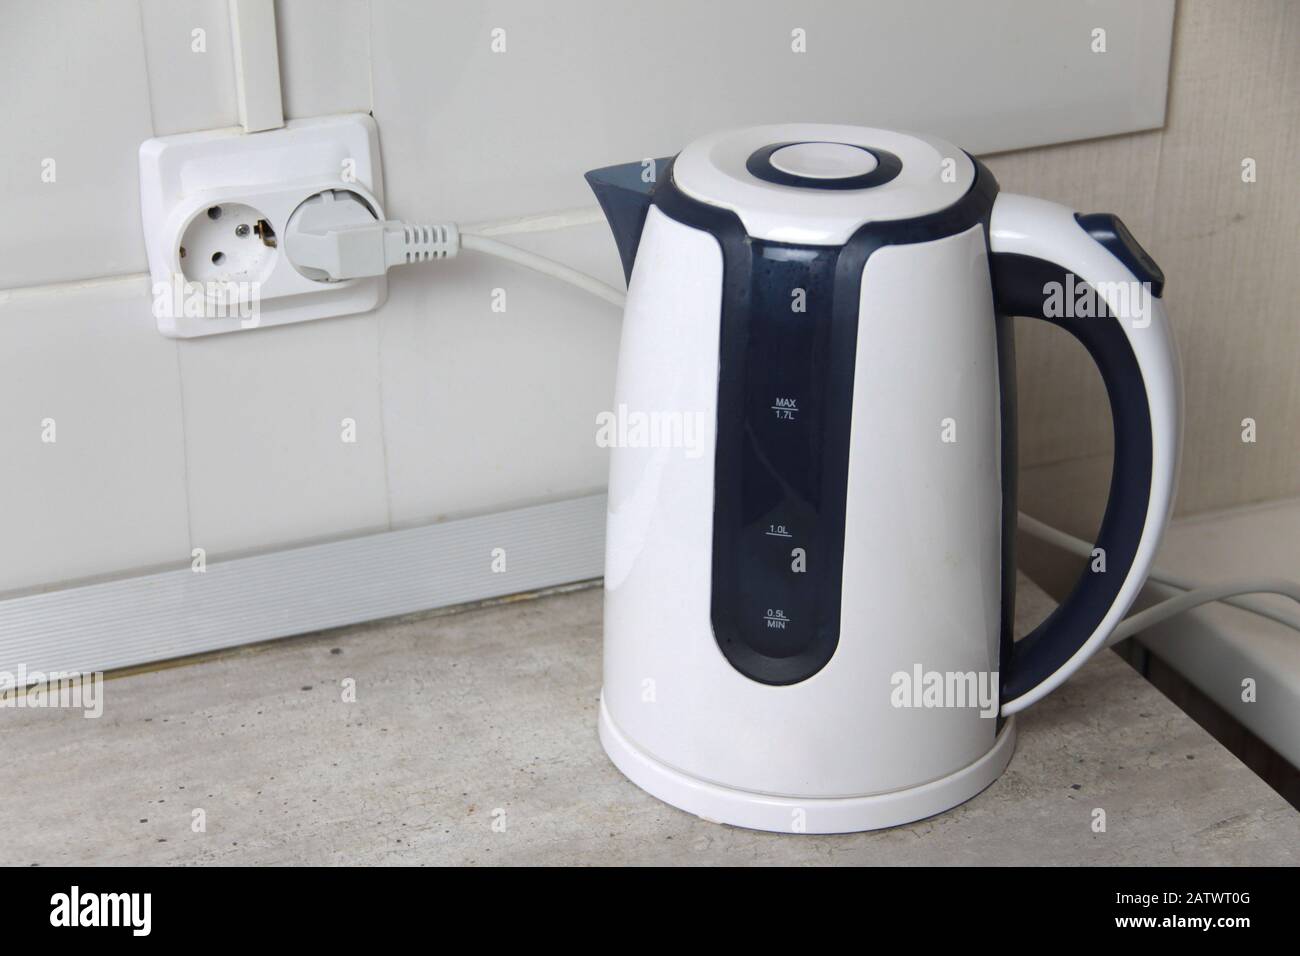 https://c8.alamy.com/comp/2ATWT0G/white-electric-kettle-stands-on-a-gray-table-plugged-into-a-power-outlet-2ATWT0G.jpg